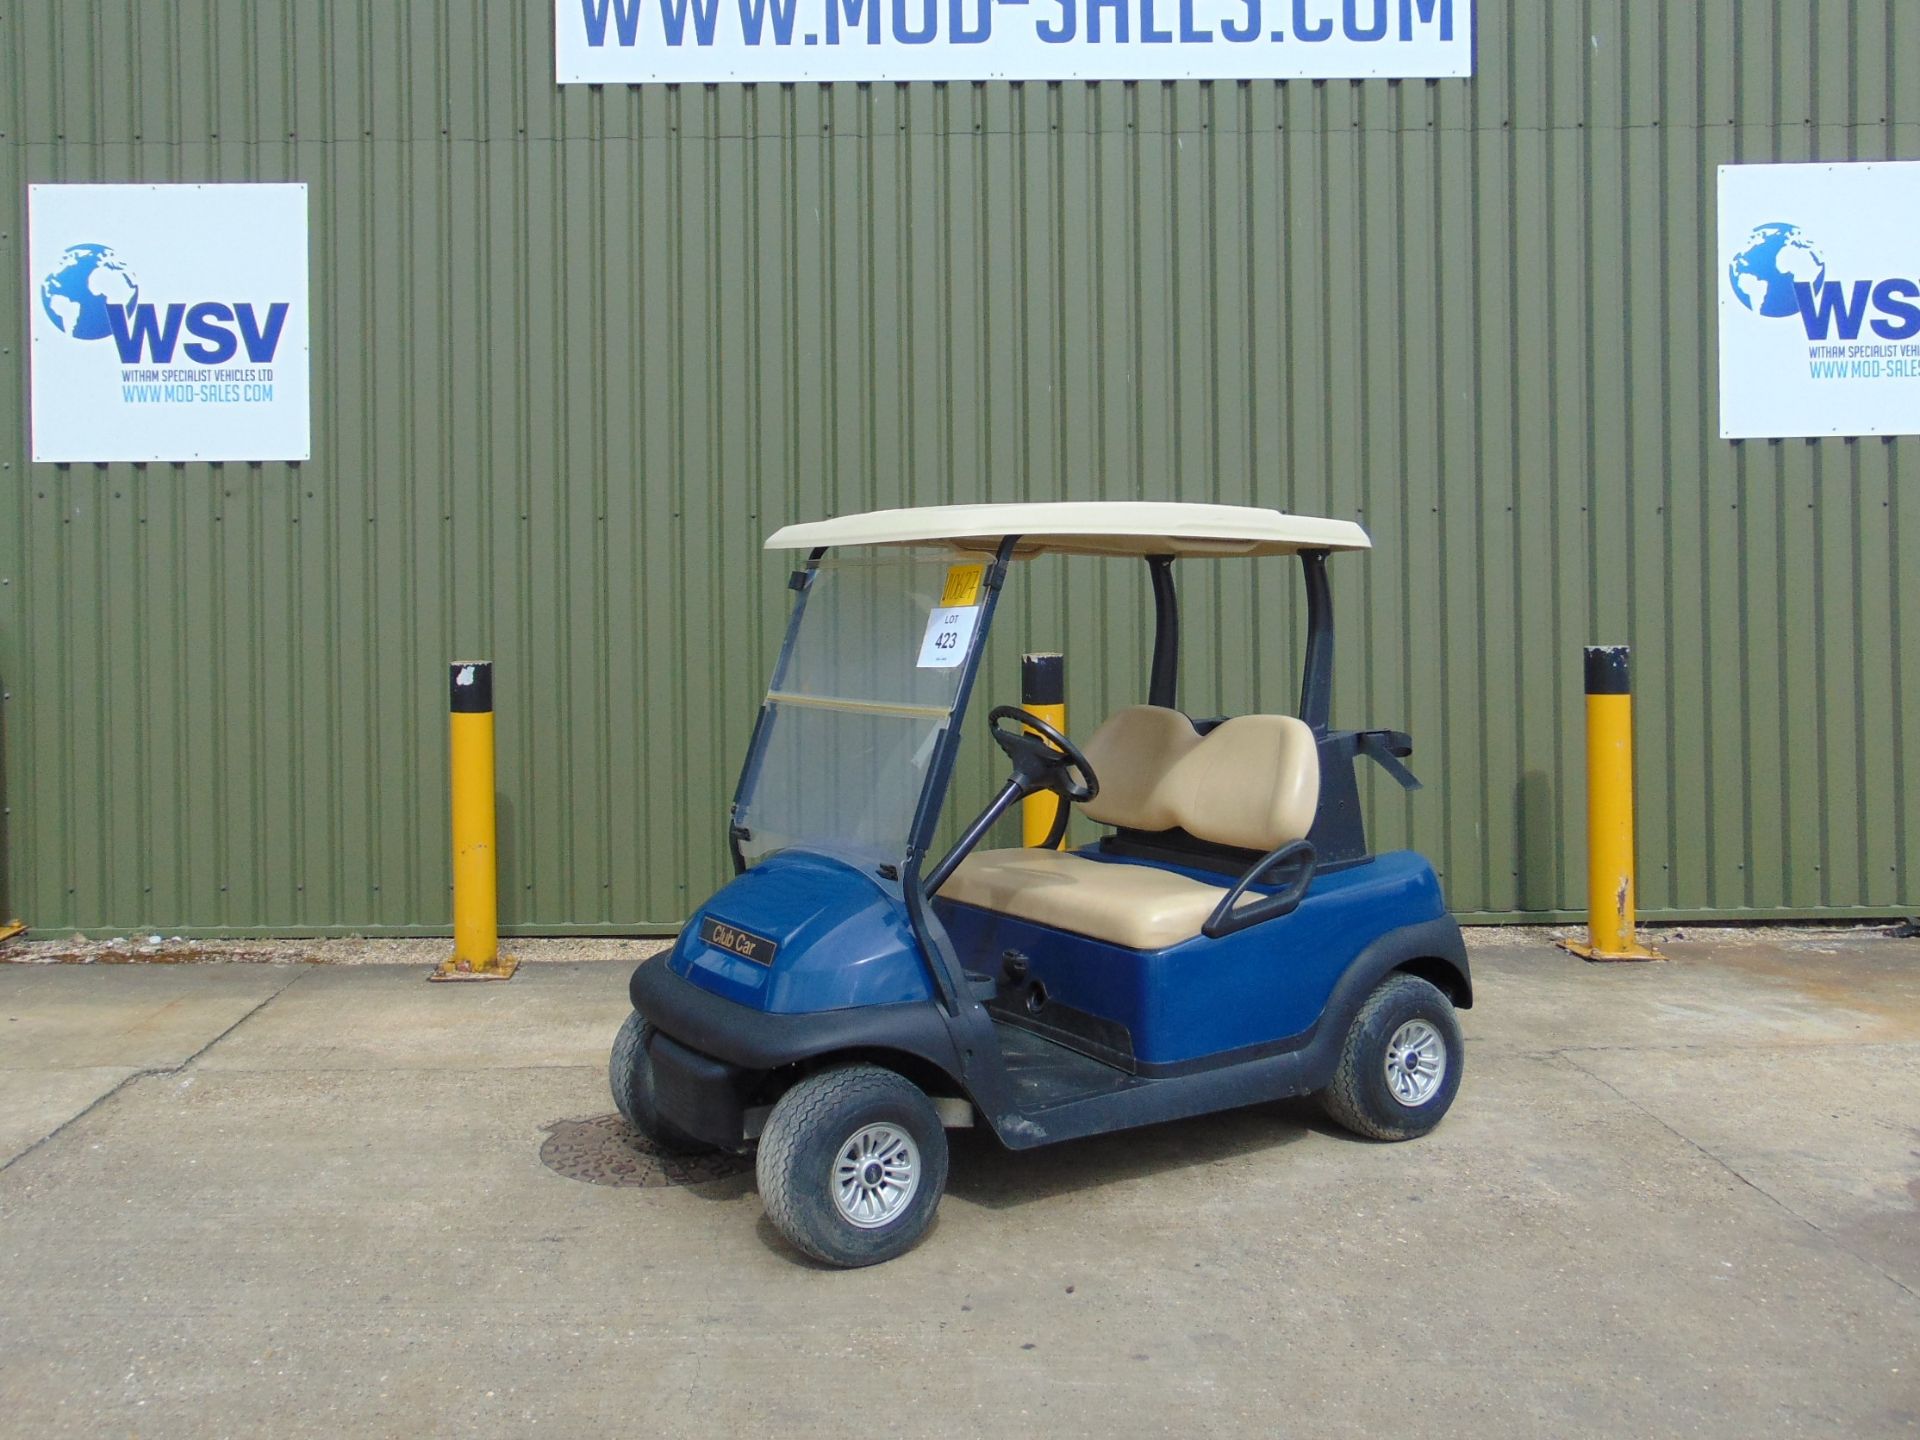 VERY NICE CLUB CAR PRECENDENT GOLF CART - LOW HOURS, NEARLY NEW TYRES